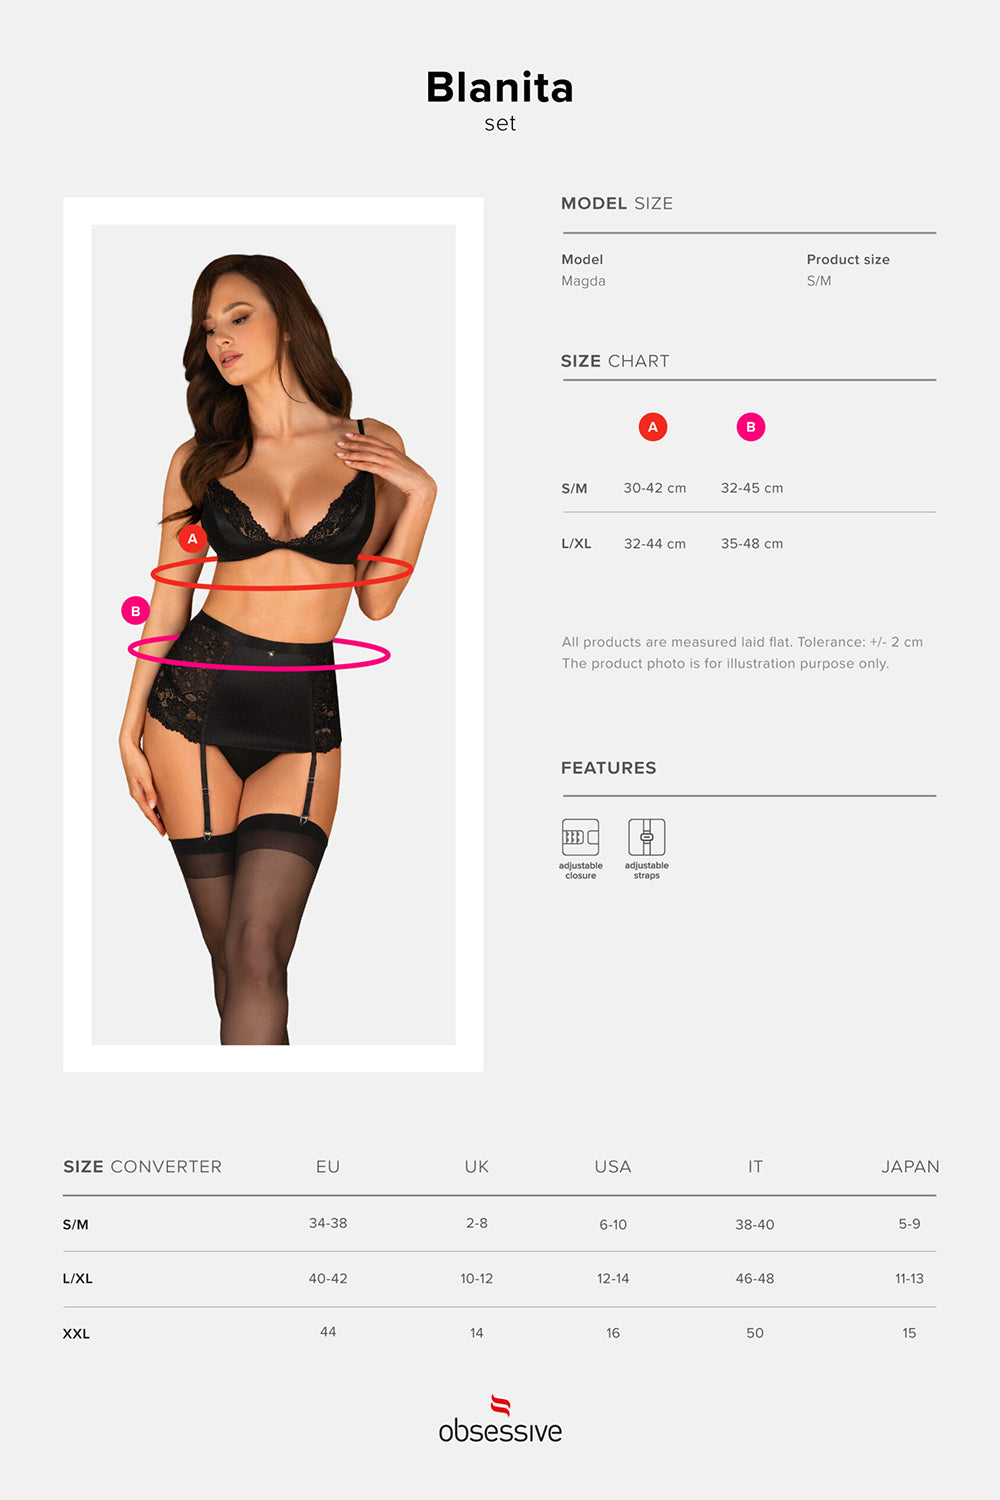 Blanita a stylish black lingerie set consisting of a bra, garter belt and thong made of ultra-soft and elastic satin material with beautiful lace